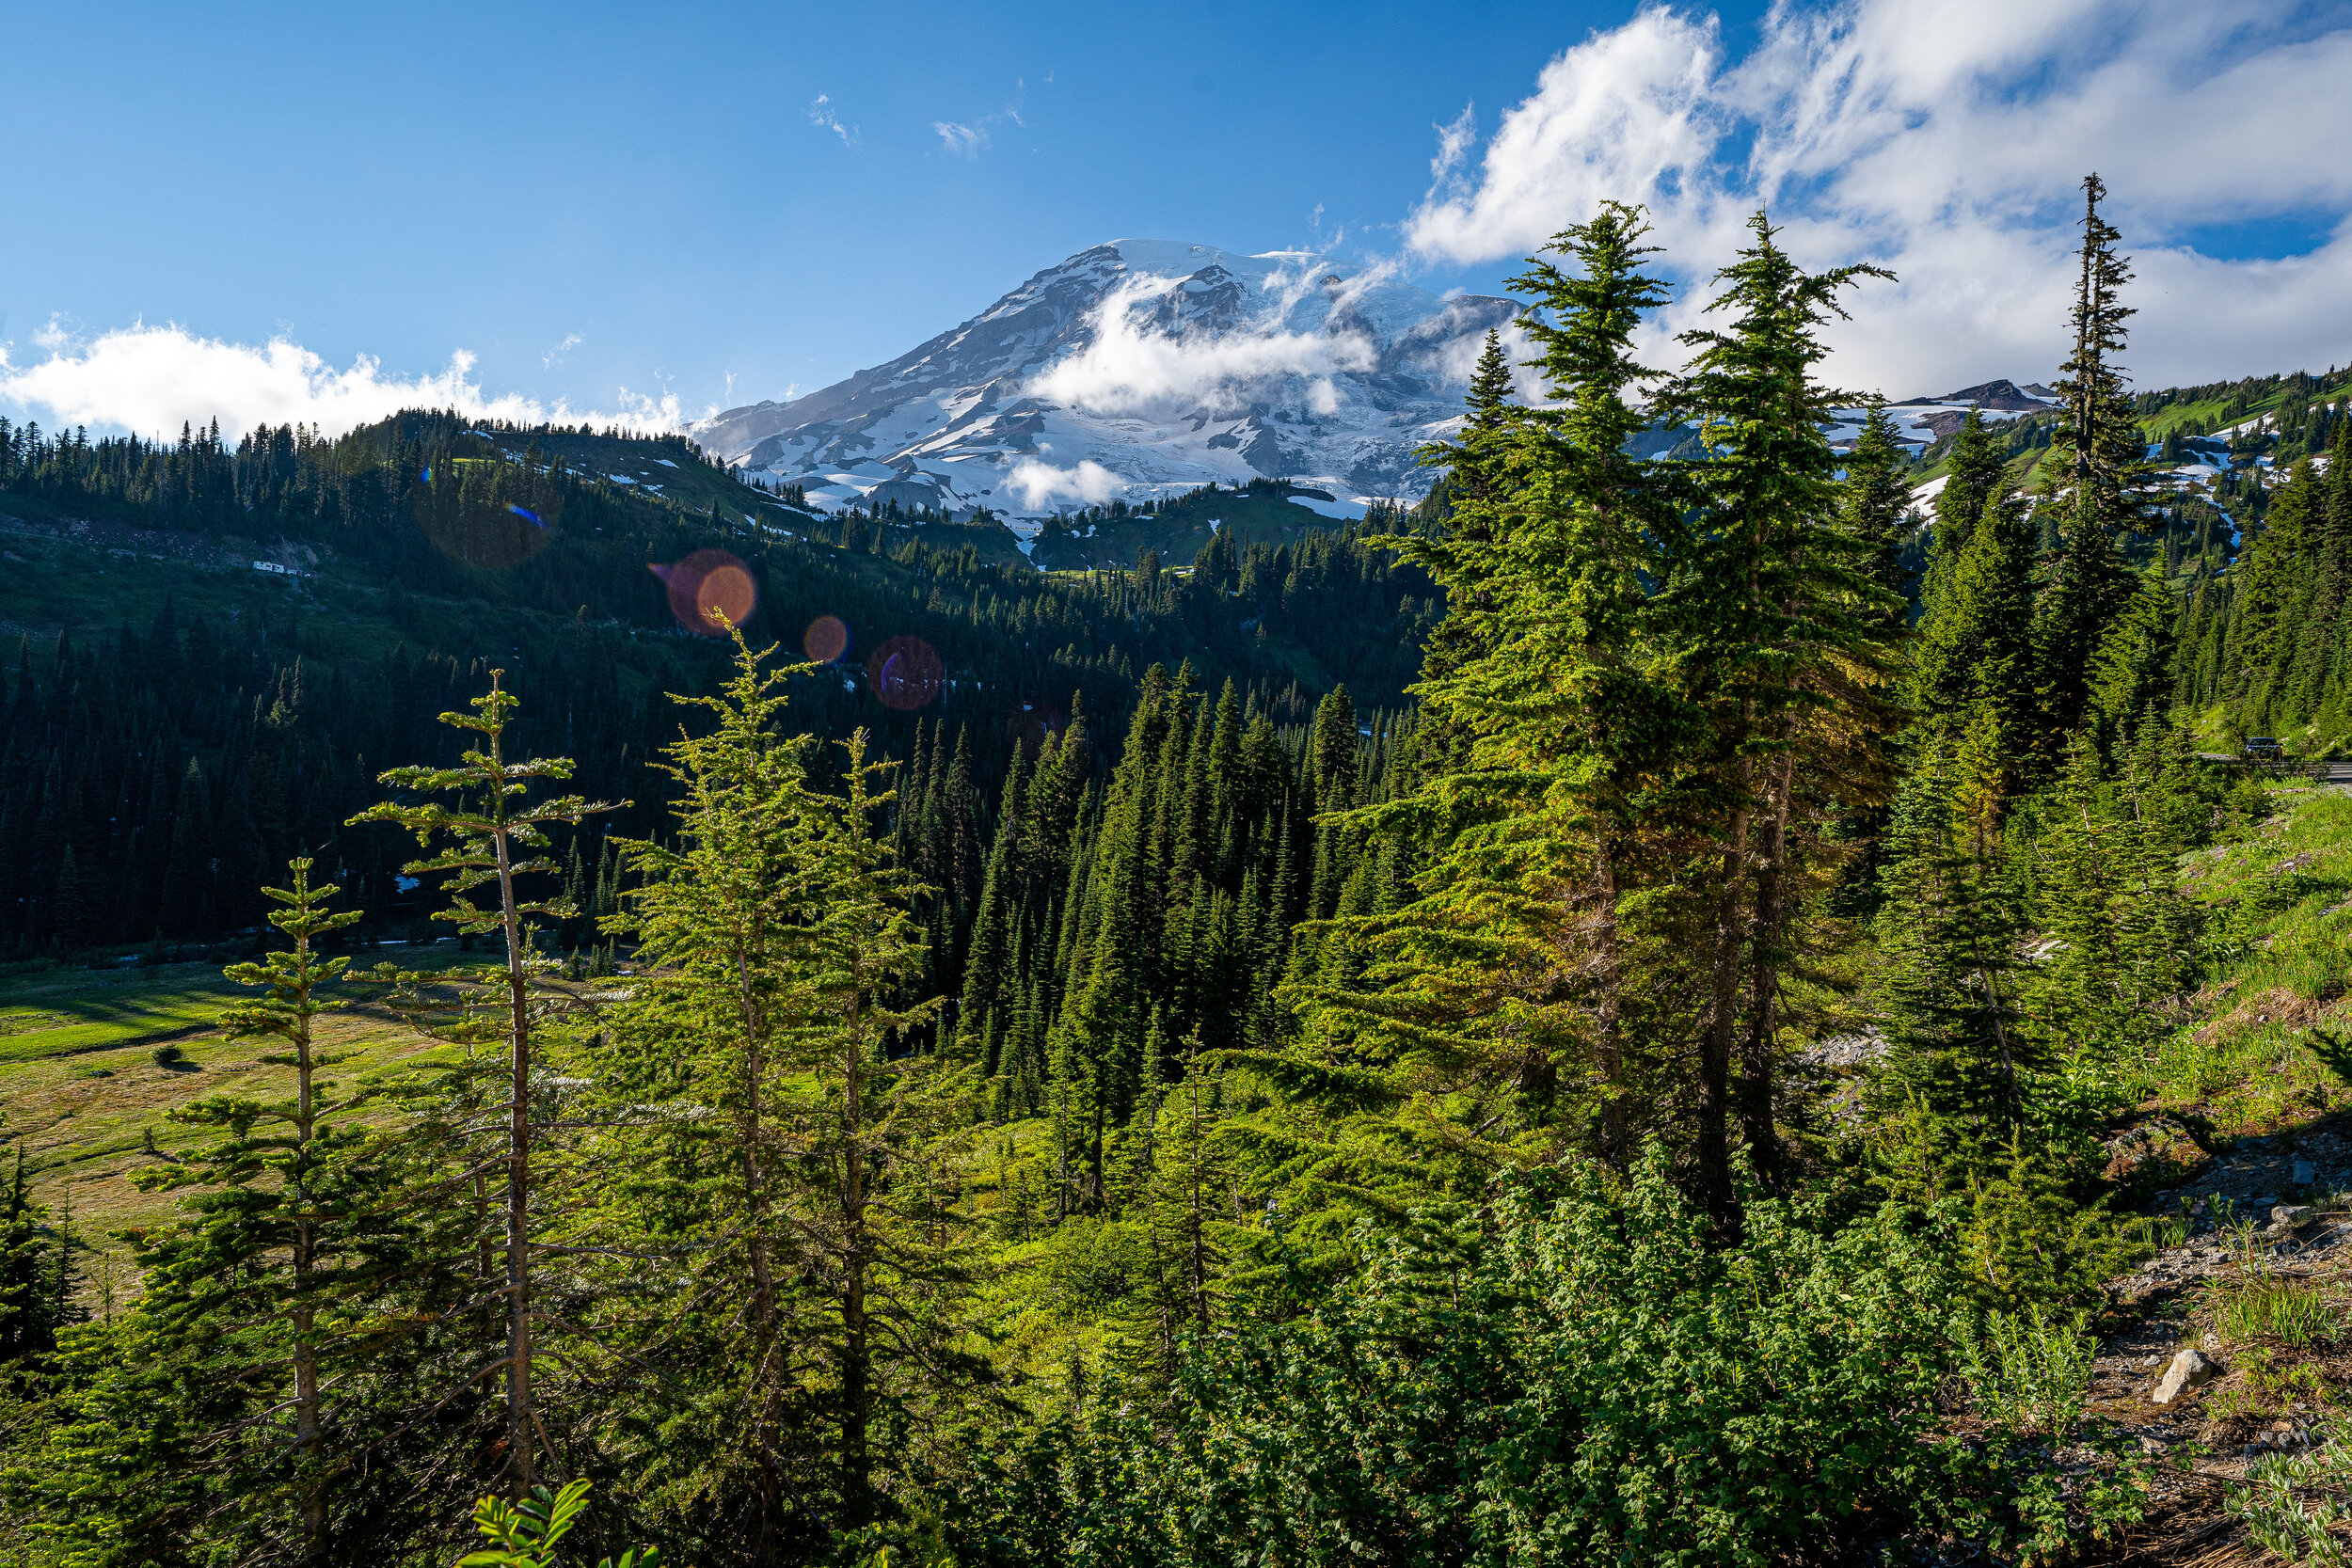  Although Mount Rainier hasn't erupted significantly in the past 500 years, it is potentially the most dangerous volcano in the Cascade Range because of its great height, frequent earthquakes, and active hydrothermal system. When Mt. Rainier erupts, 